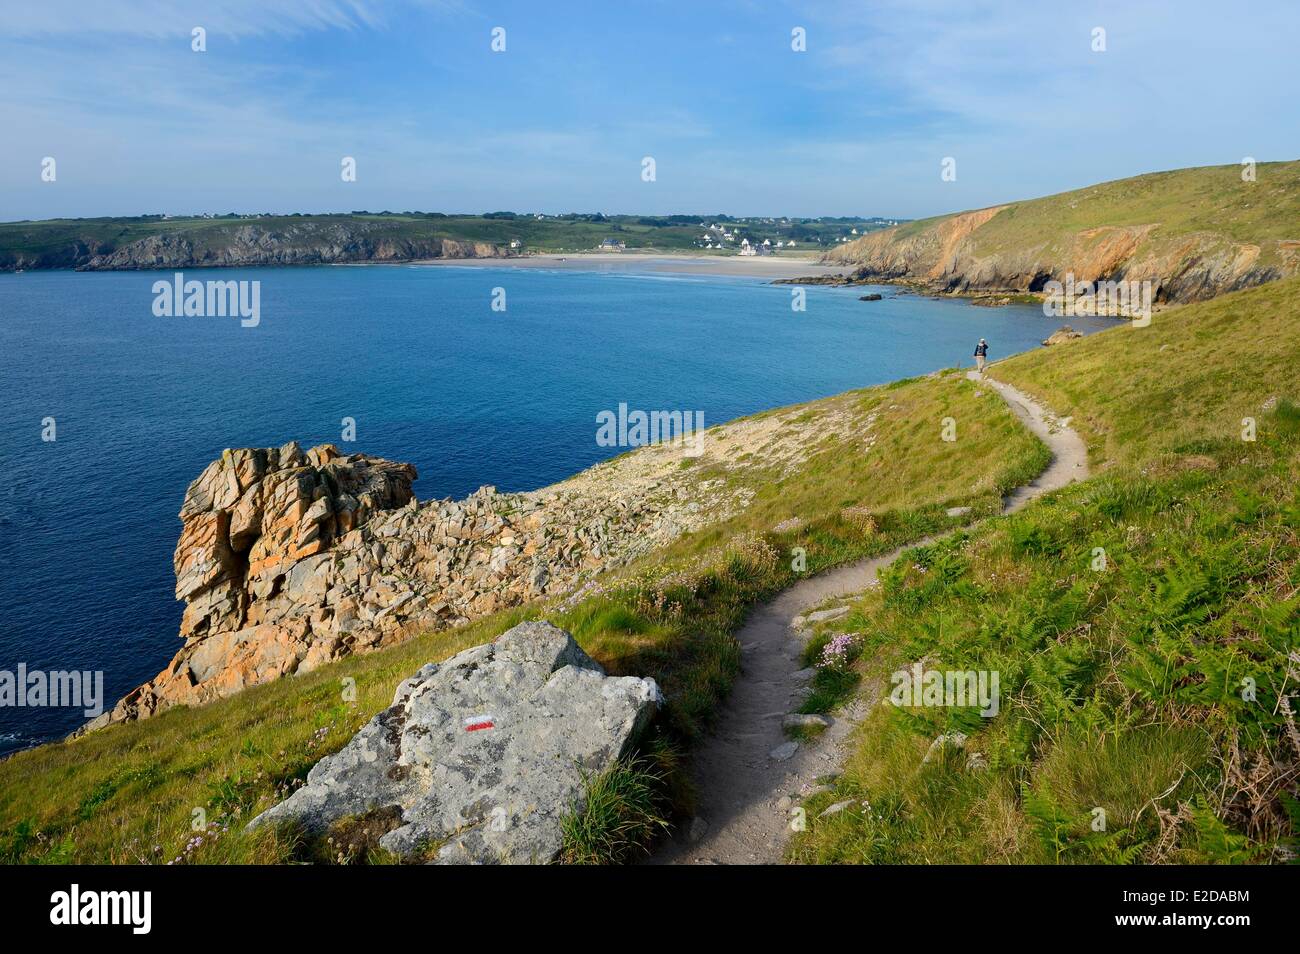 France, Finistere, Iroise Sea, Plogoff, Baie des Trepasses, between the Pointe du Raz and the Pointe du Van in the background, GR 34 trail Stock Photo